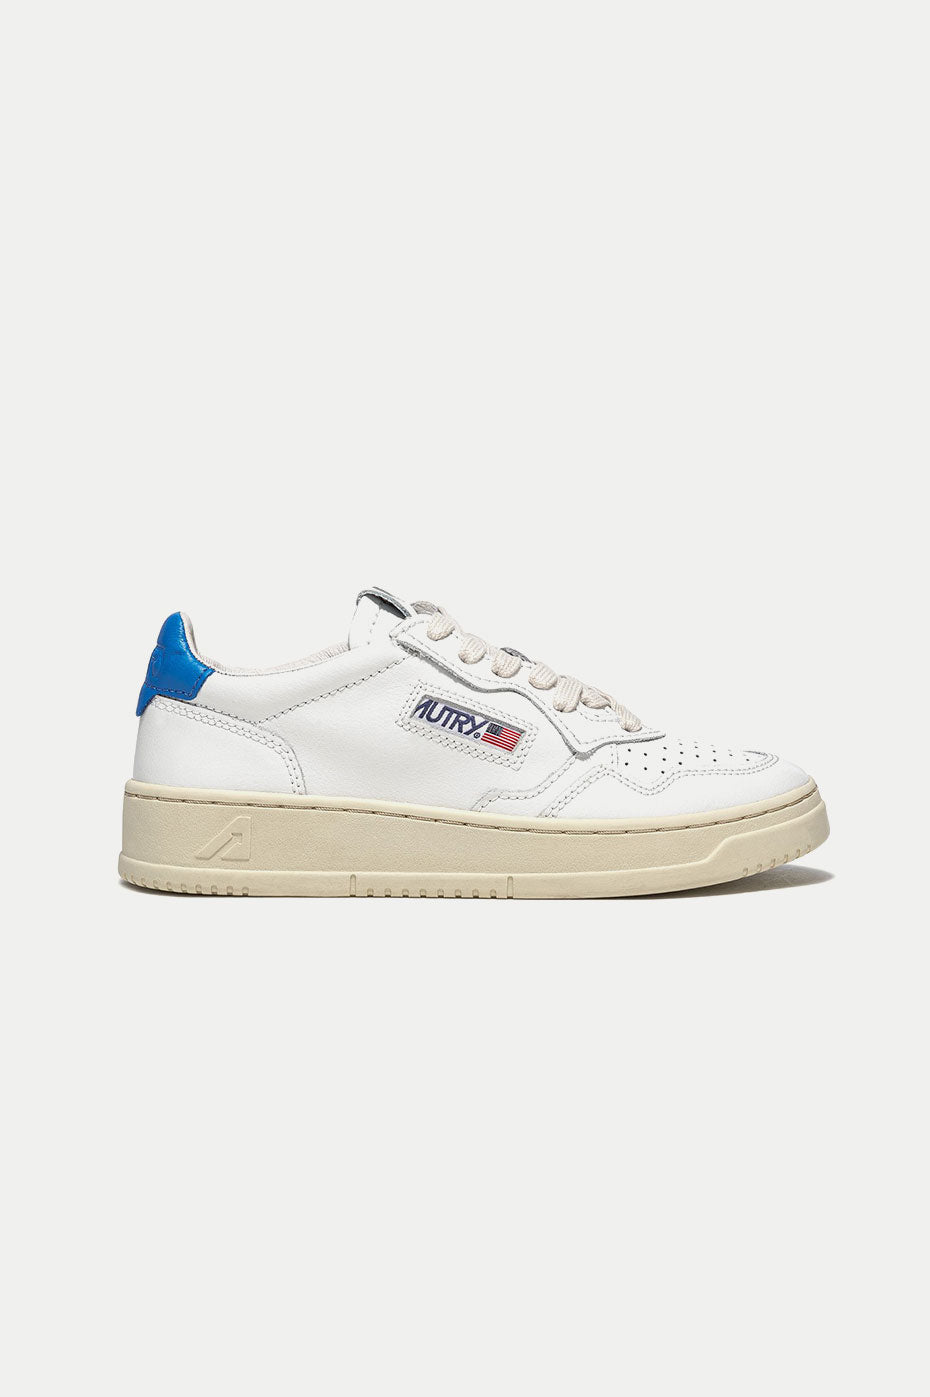 Autry 01 White Blue Low Leather Mens Trainers